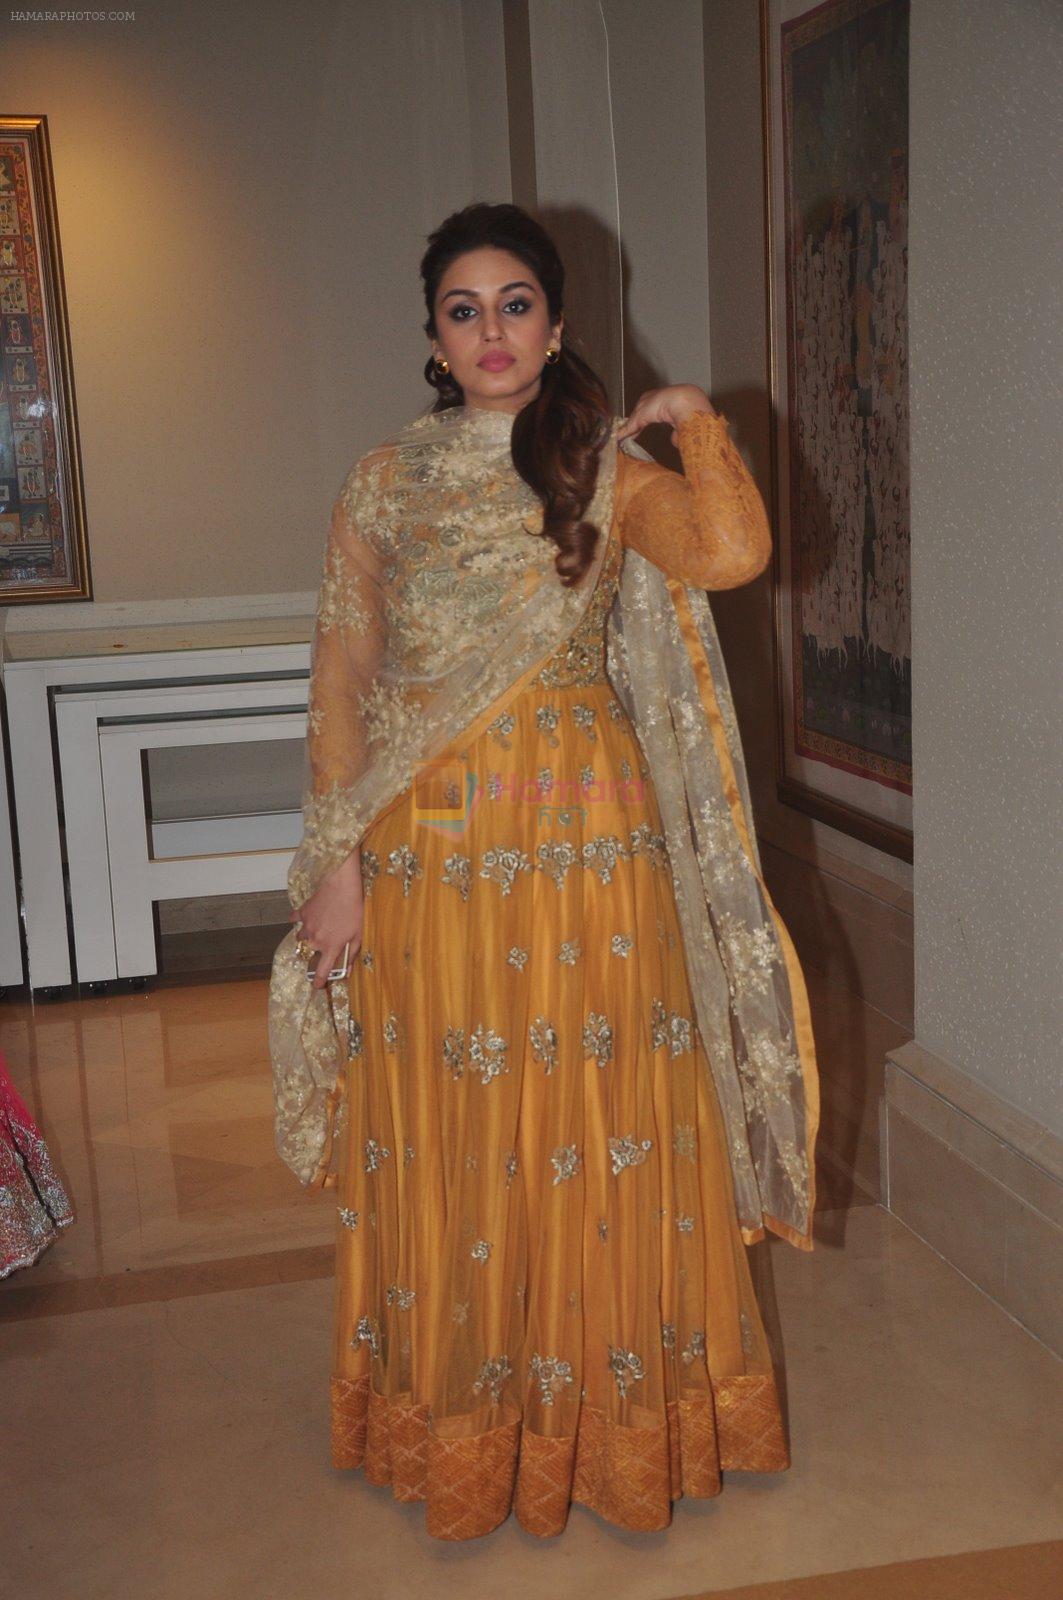 Huma Qureshi at Vikram Singh's Brother Uday Singh and Ali Morani's daughter Shirin's Sangeet Ceremony on 18th Dec 2014